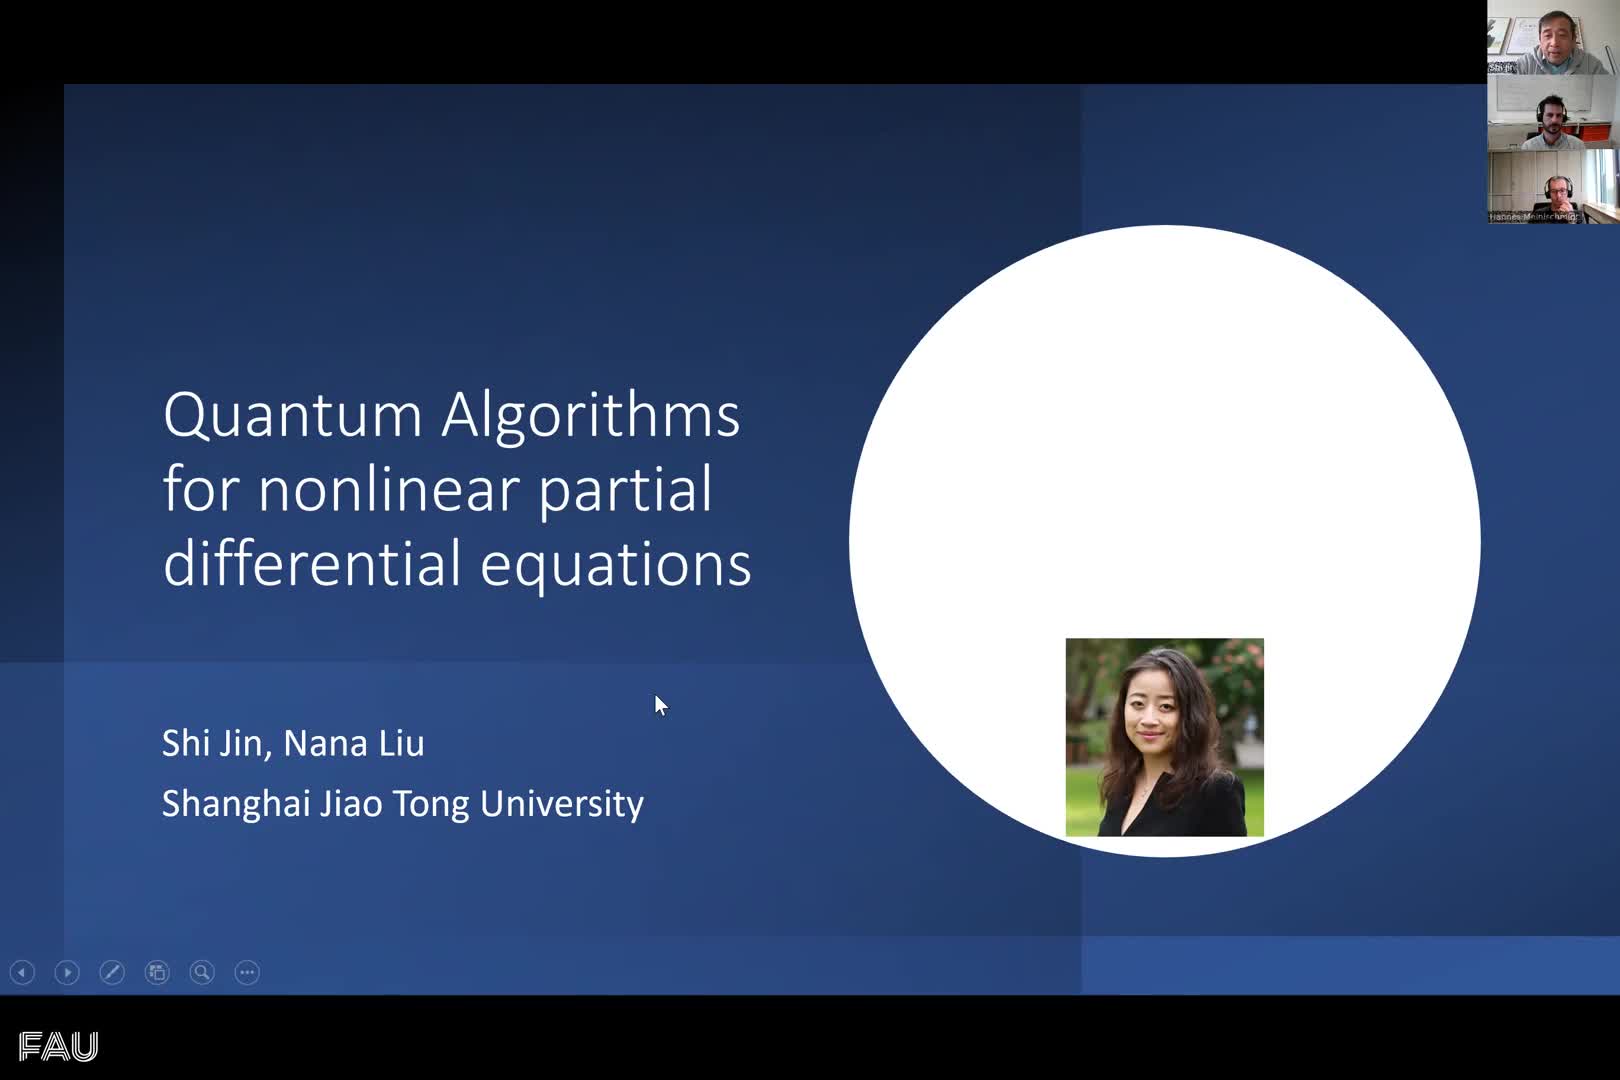 Quantum algorithms for nonlinear partial differential equations (Shi Jin, Shanghai Jiao Tong University) preview image